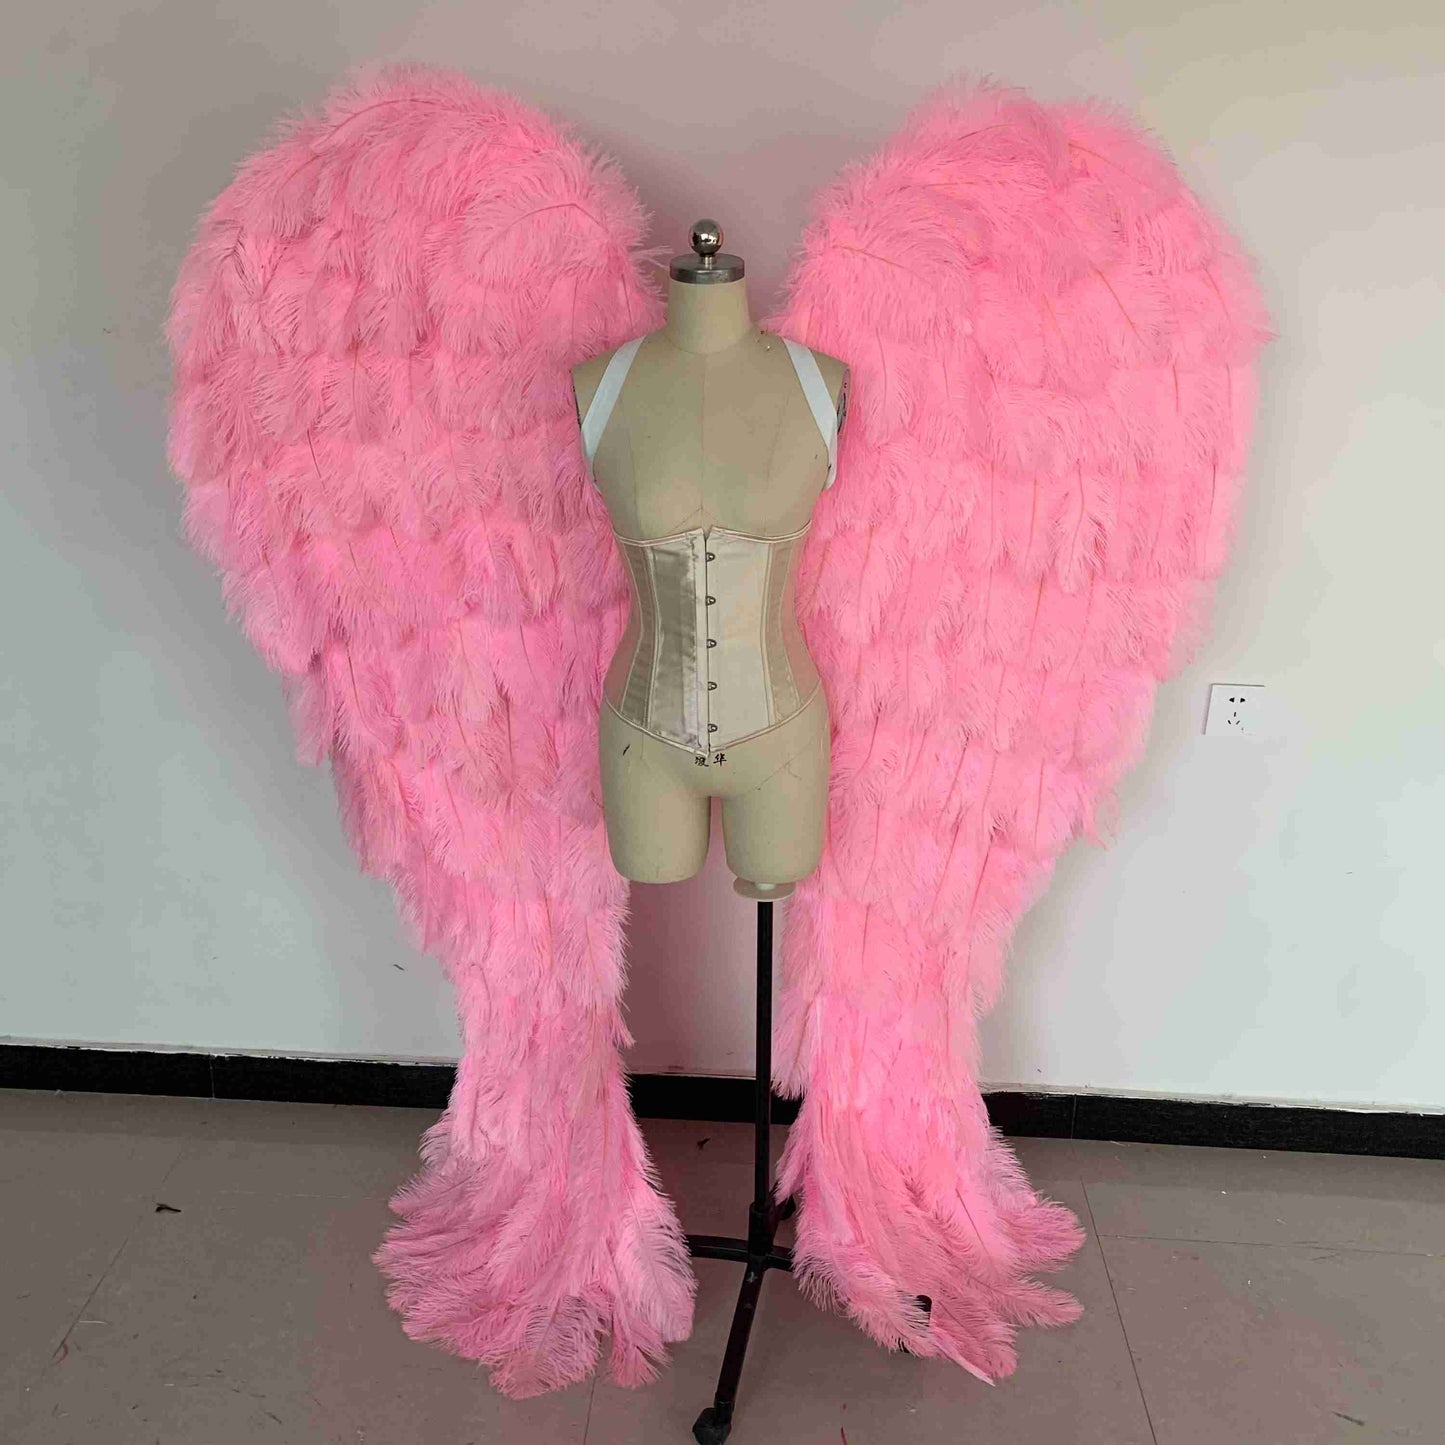 Our luxury bright pink angel wings from the front. Made from ostrich feathers. Wings for angel costume. Suitable for photoshoots especially for boudoirs.